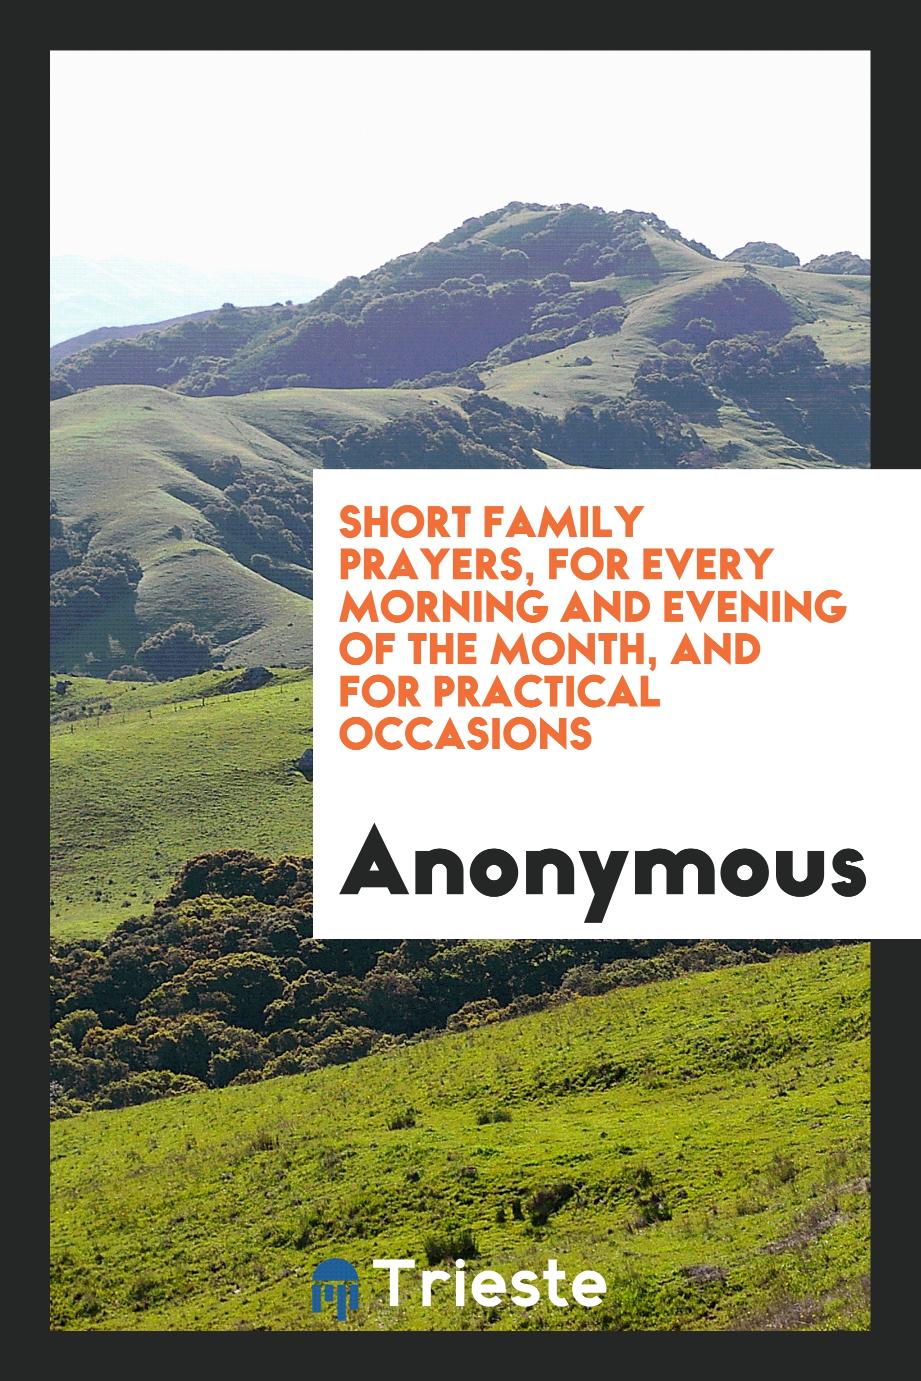 Short Family Prayers, for Every Morning and Evening of the Month, and for Practical Occasions